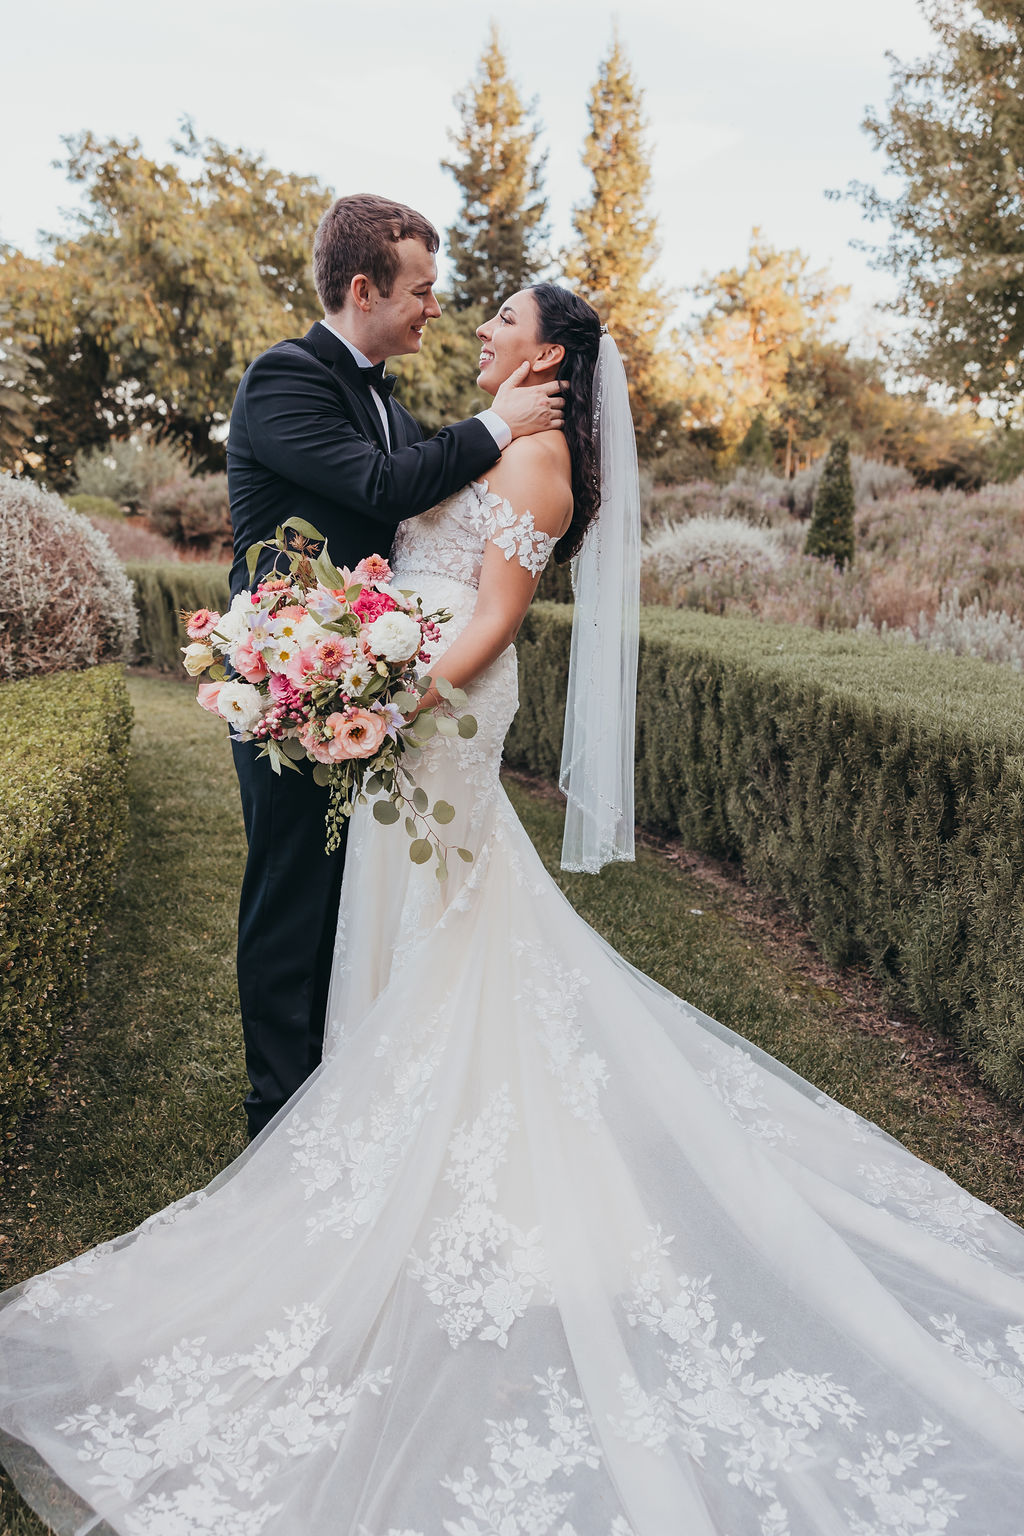 A bride and groom embrace in a garden, the bride holding a large bouquet and wearing a long lace dress, both smiling at each other.